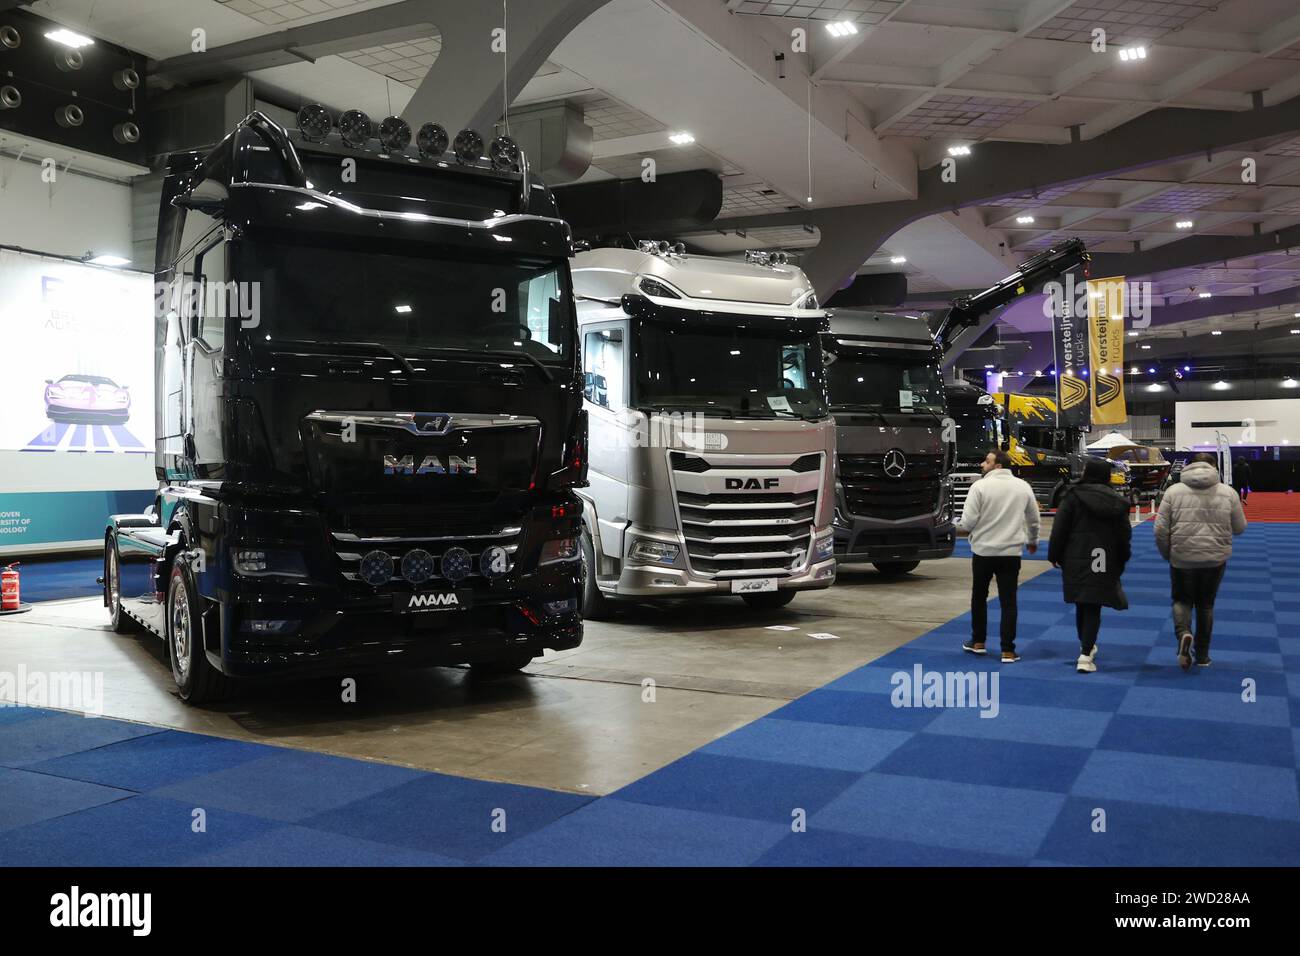 Brussels, Belgium. 17th Jan, 2024. Visitors view trucks displayed at Brussels Auto Show in Brussels, Belgium, Jan. 17, 2024. This year's Brussels Auto Show (BAS) kicked off on Wednesday in the Belgian capital, presenting over 400 cars, motorcycles, and trucks from more than 150 companies, putting sustainable mobility in the limelight. Credit: Zhao Dingzhe/Xinhua/Alamy Live News Stock Photo